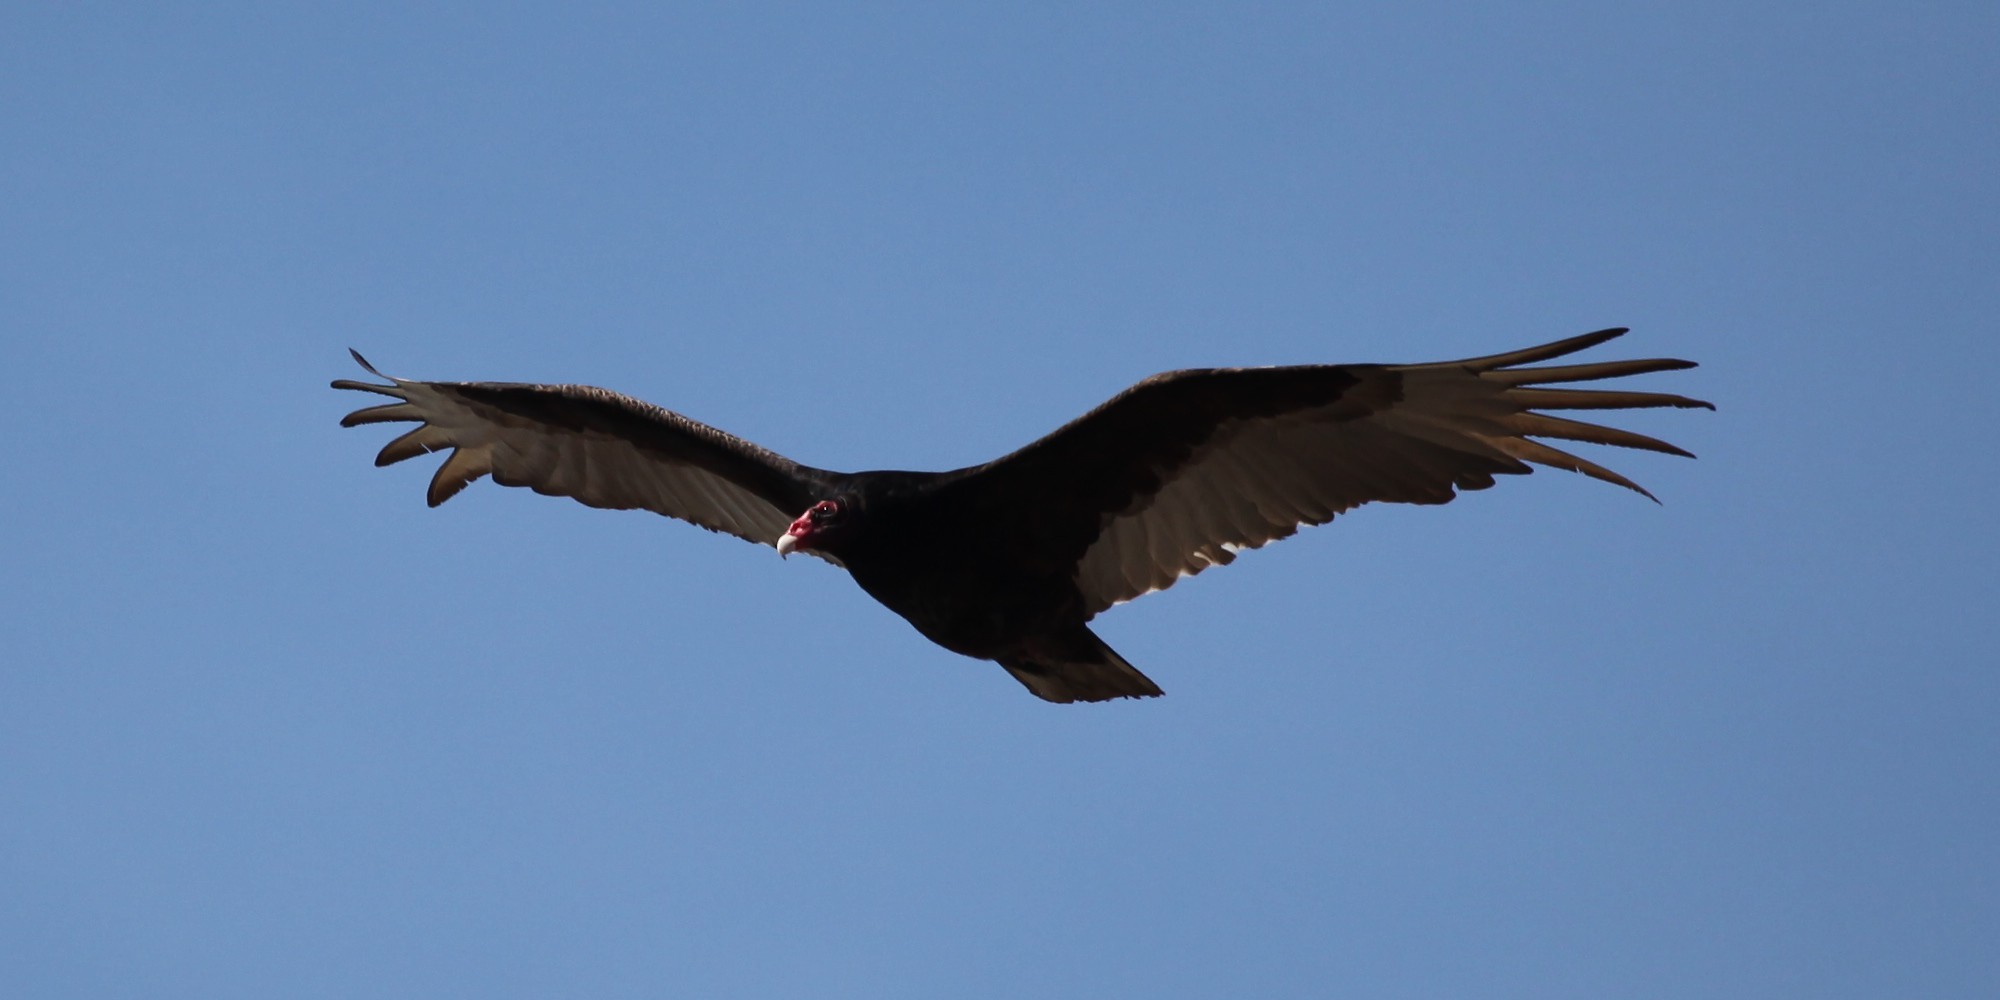 Alaskans have been spotting turkey vultures all over the state this year